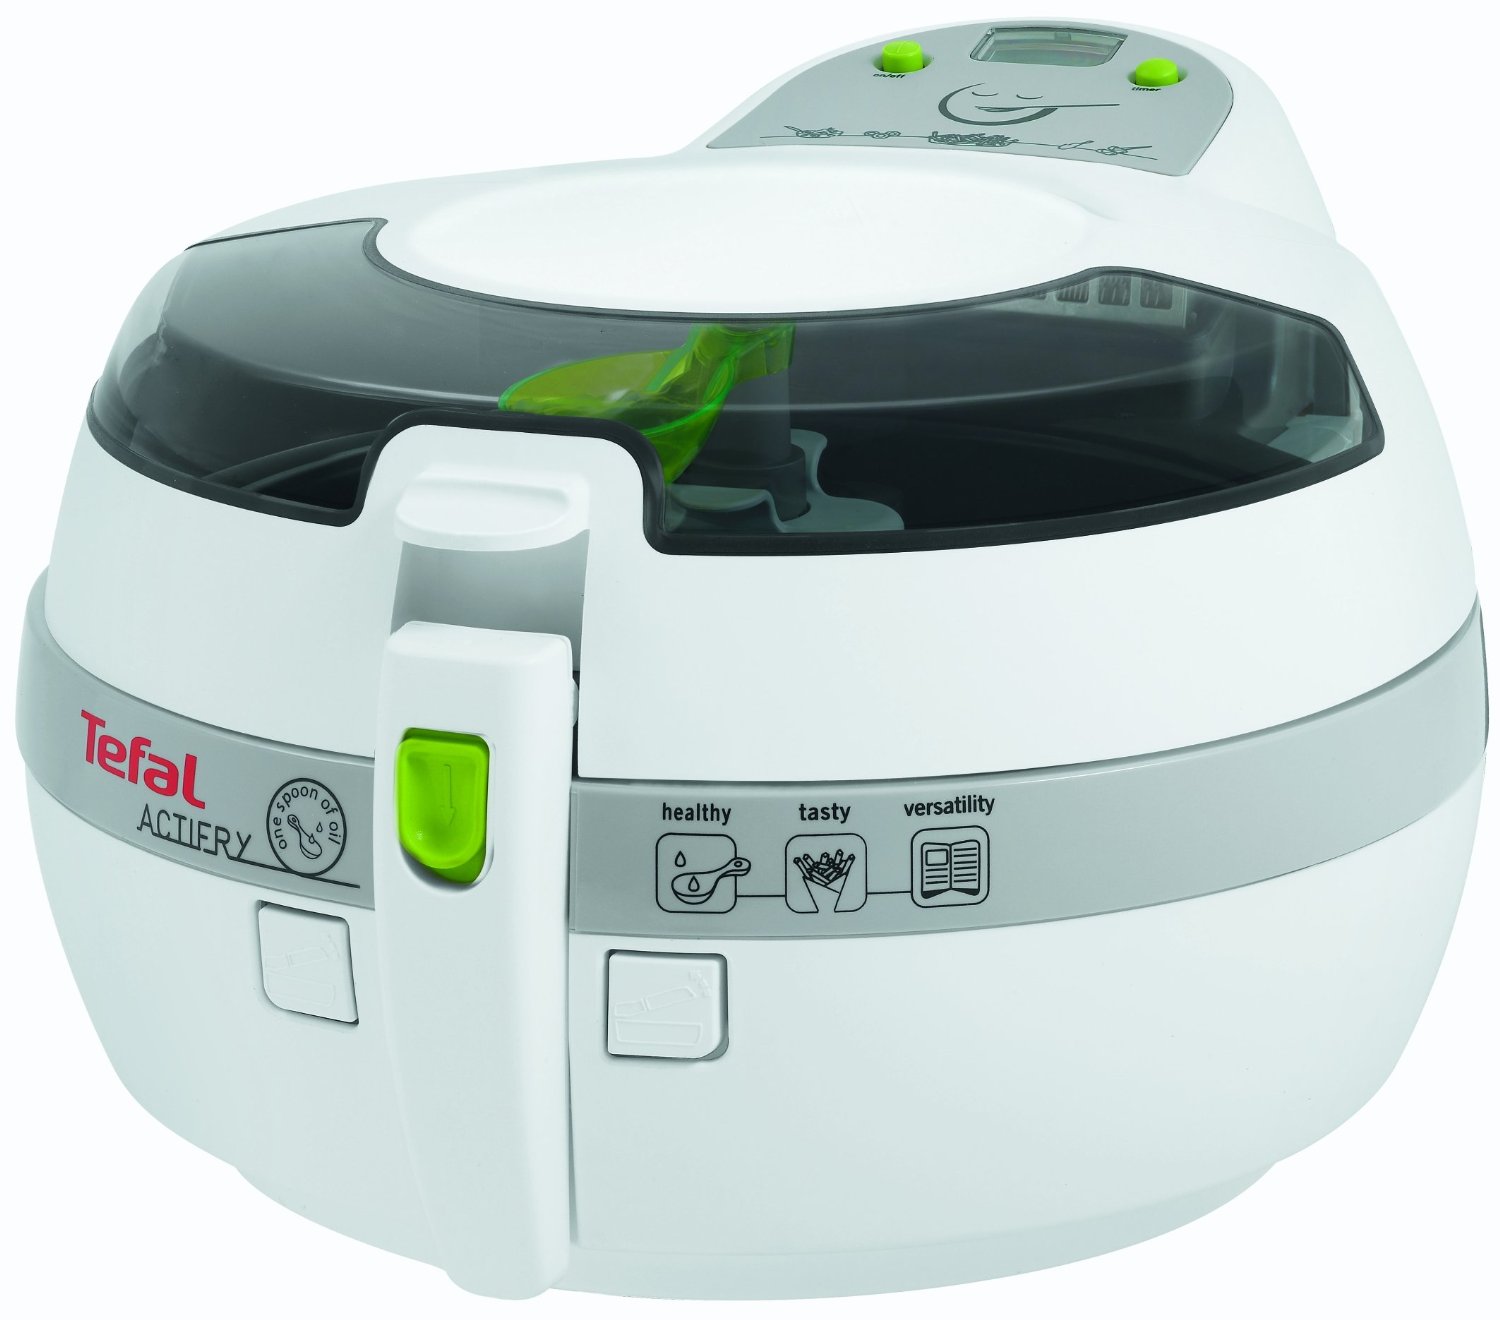 Tefal Fz Hei Luft Fritteuse Im Test Mit Actifry